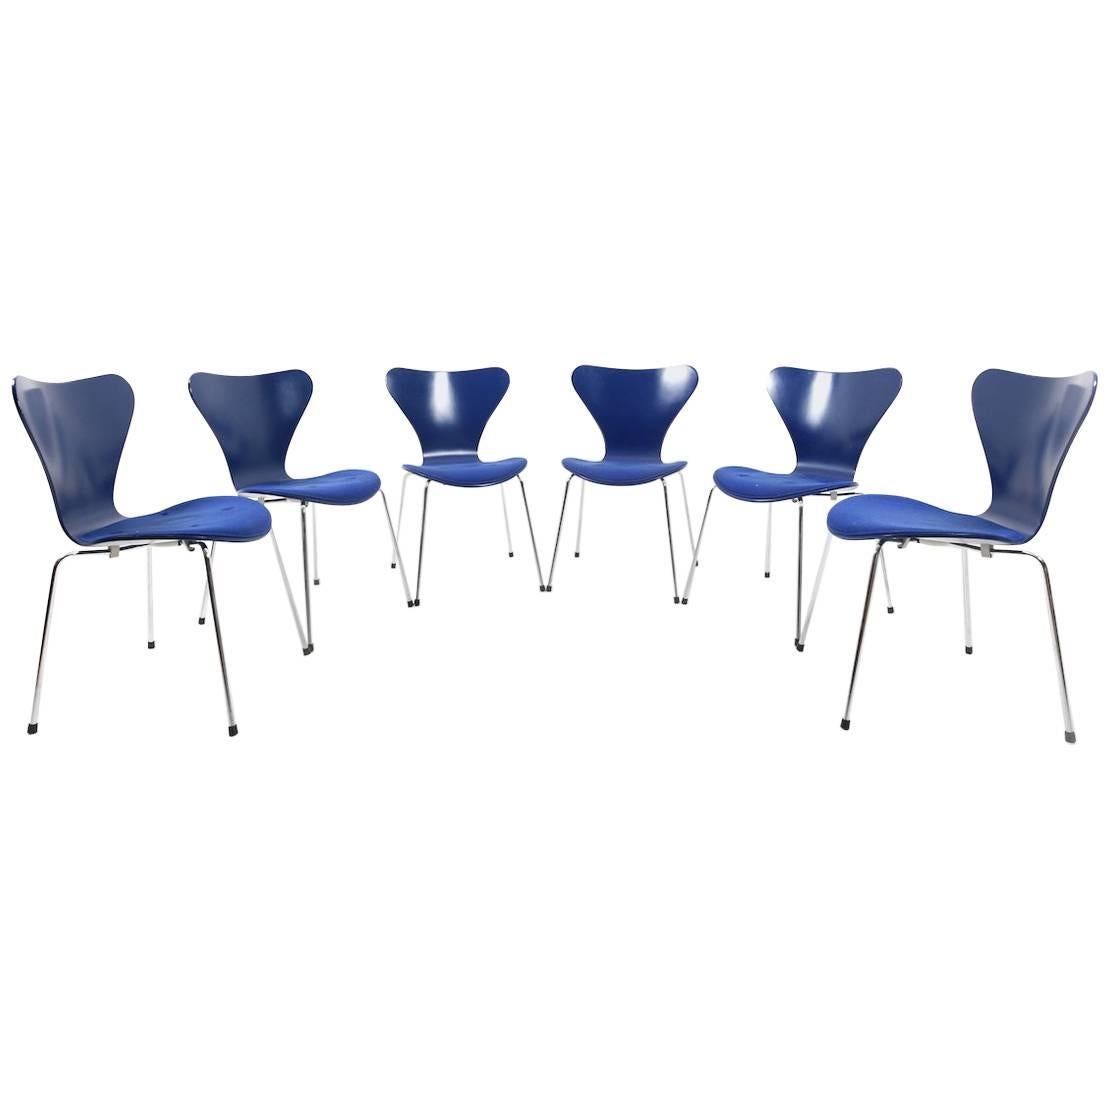 Set of Six Blue Arne Jacobsen Chairs, Mod. 3107 For Sale